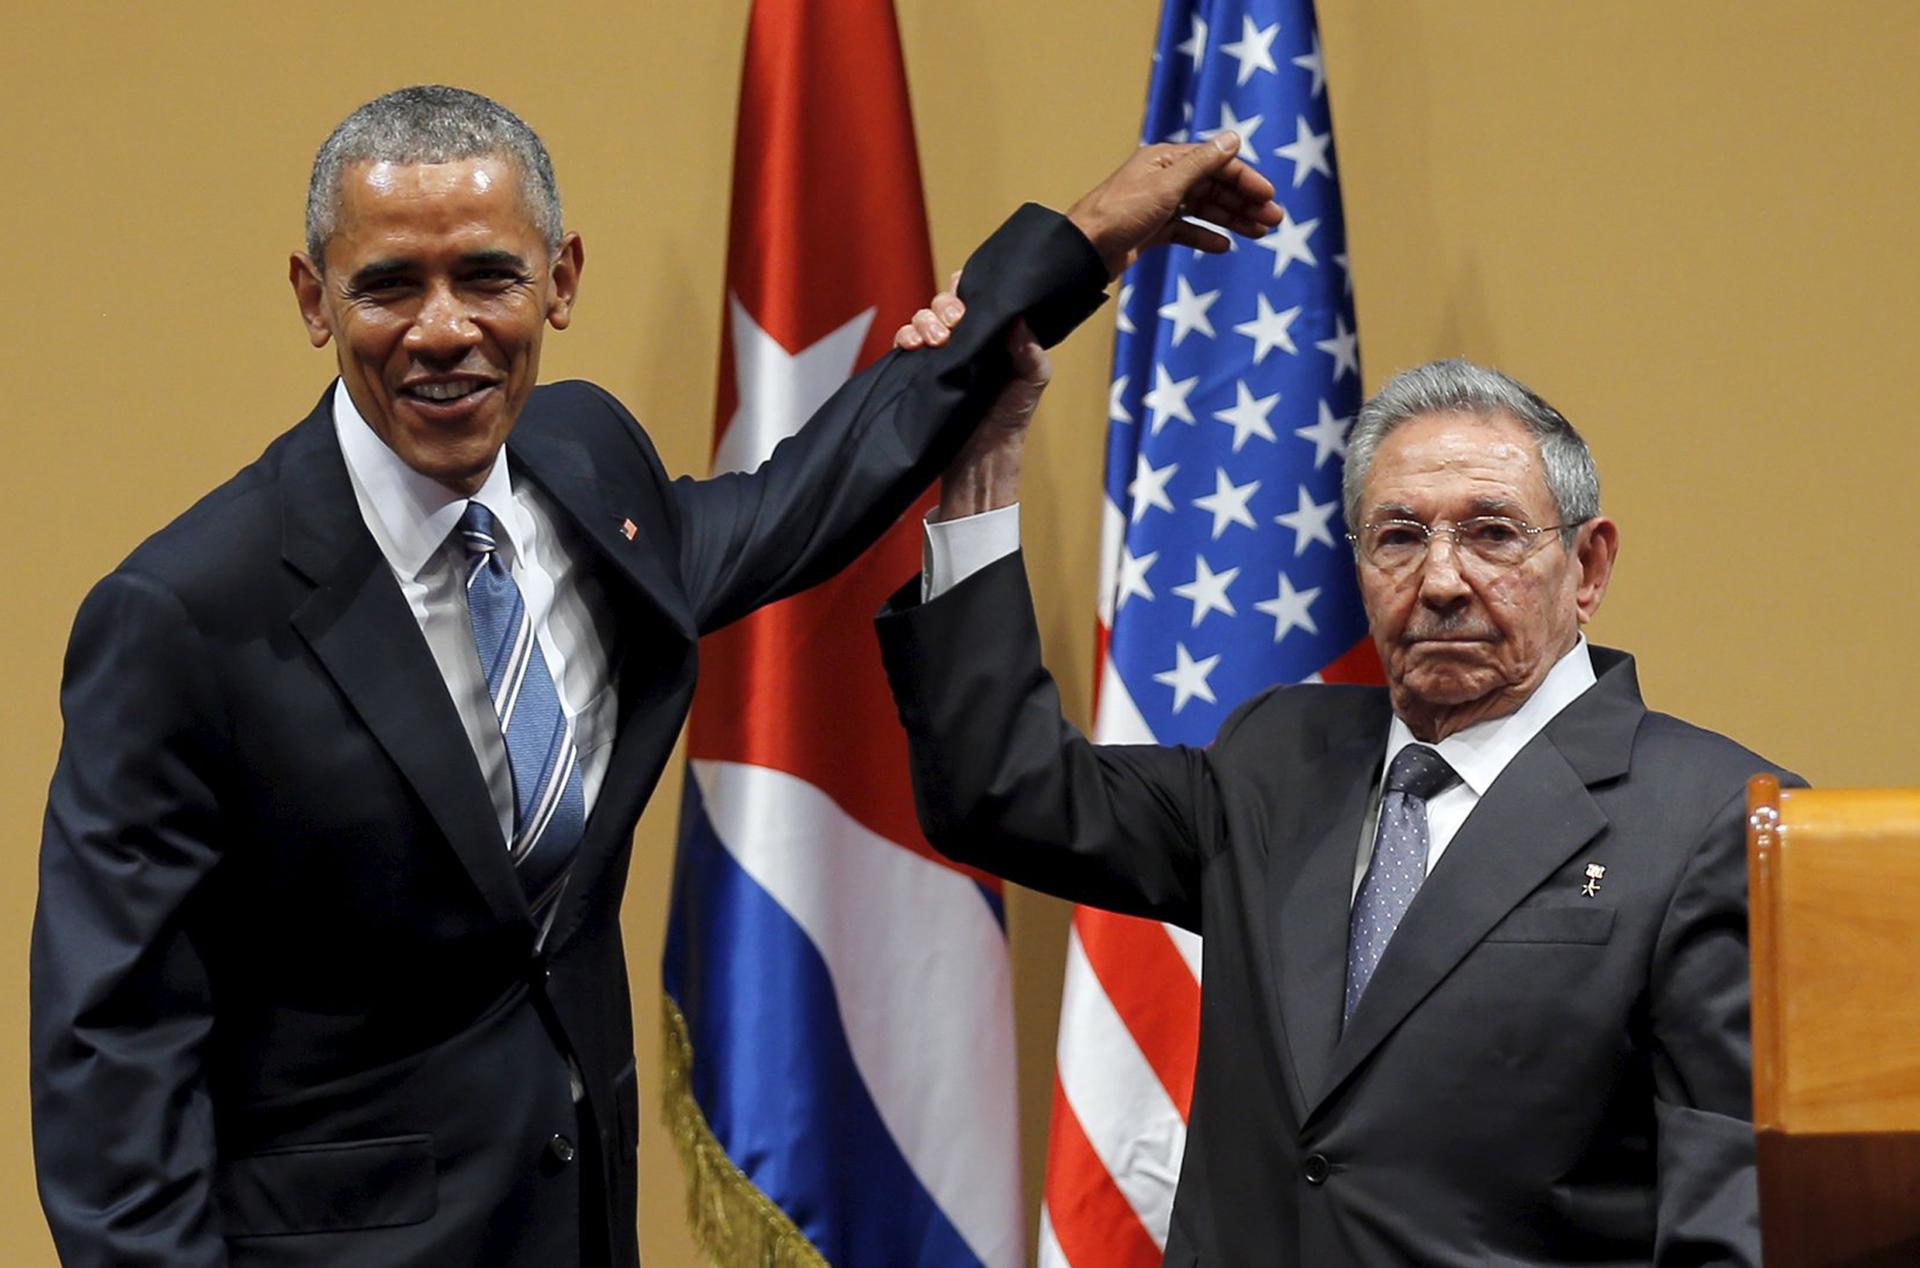 US President Barack Obama and Cuban President Raúl Castro gesture after a news conference as part of President Obama's three-day visit to Cuba. In Havana March 21, 2016.